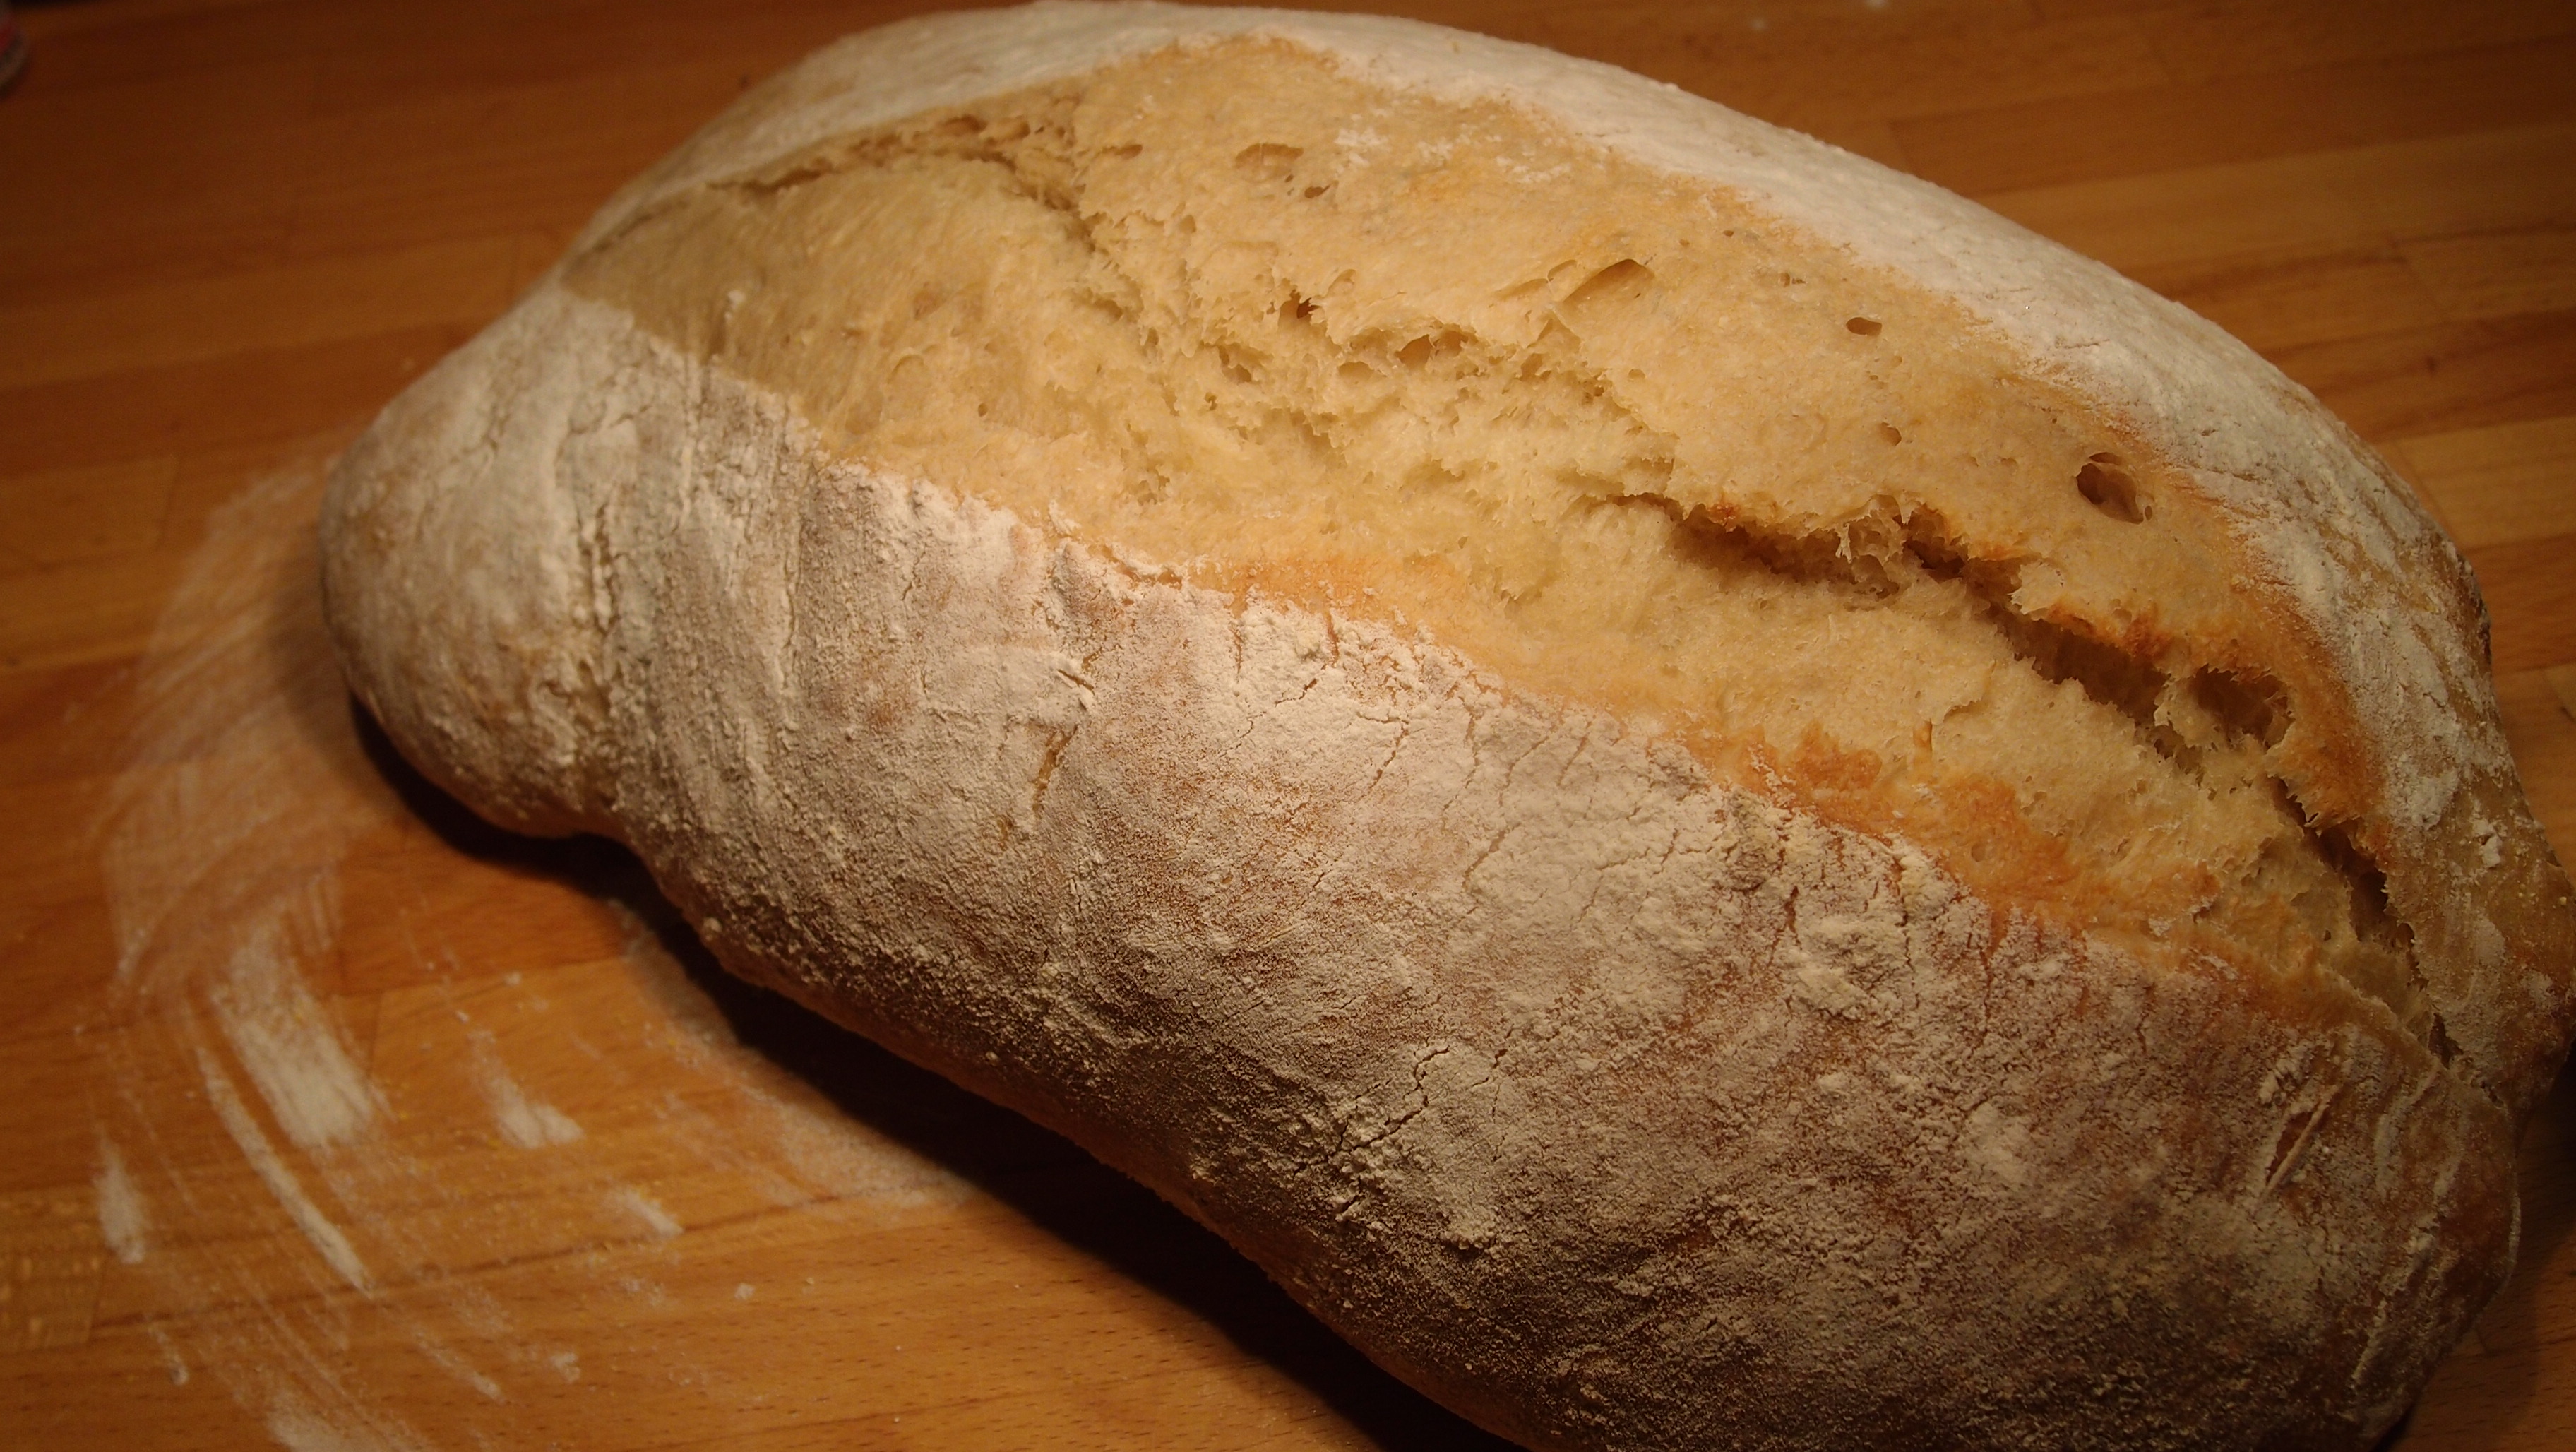 What is the most popular beer bread recipe that is easy to make?